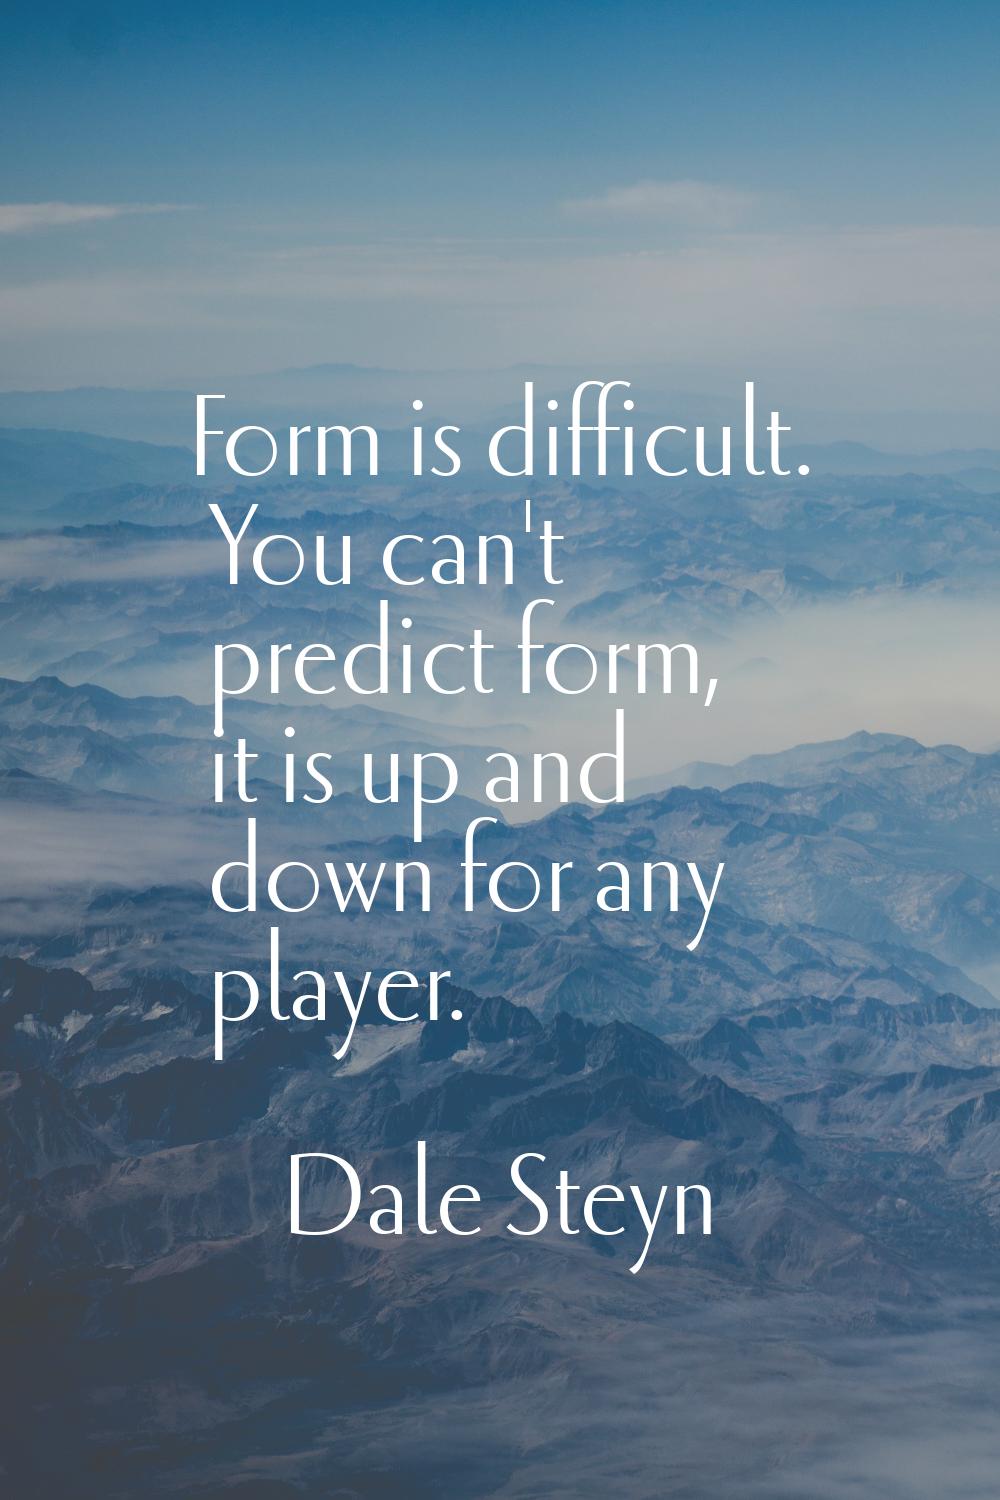 Form is difficult. You can't predict form, it is up and down for any player.